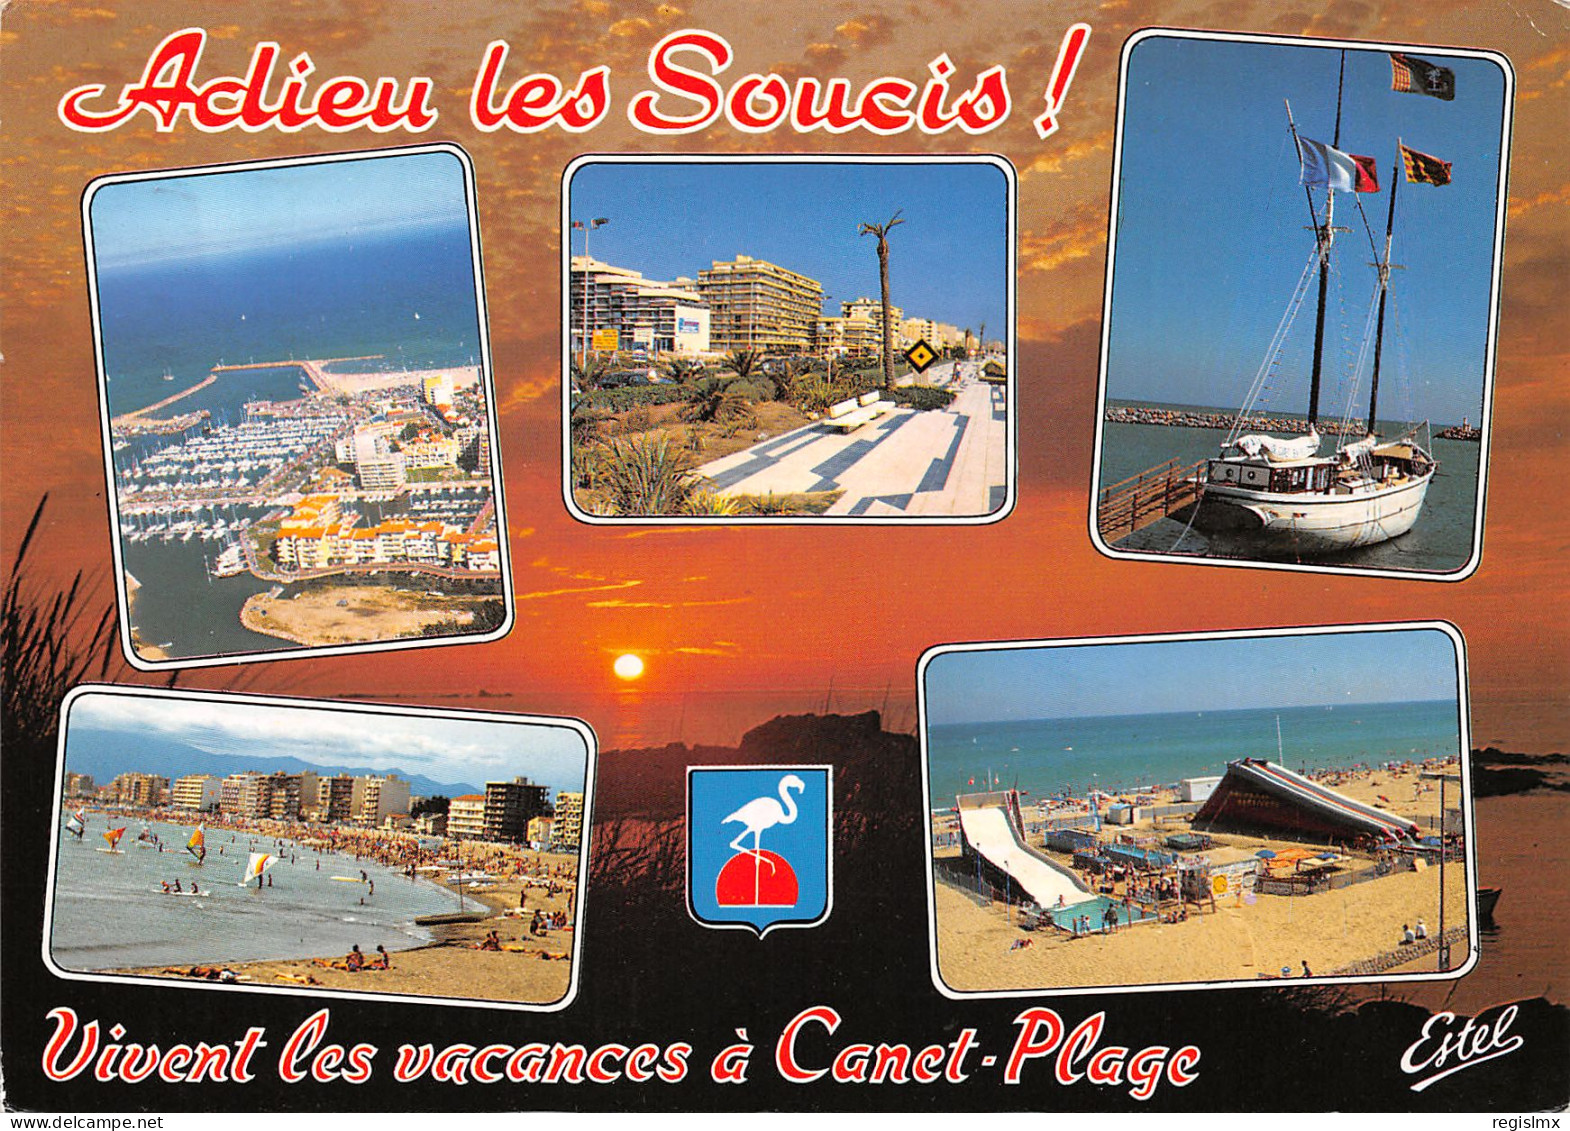 66-CANET PLAGE-N°T2663-C/0193 - Canet Plage